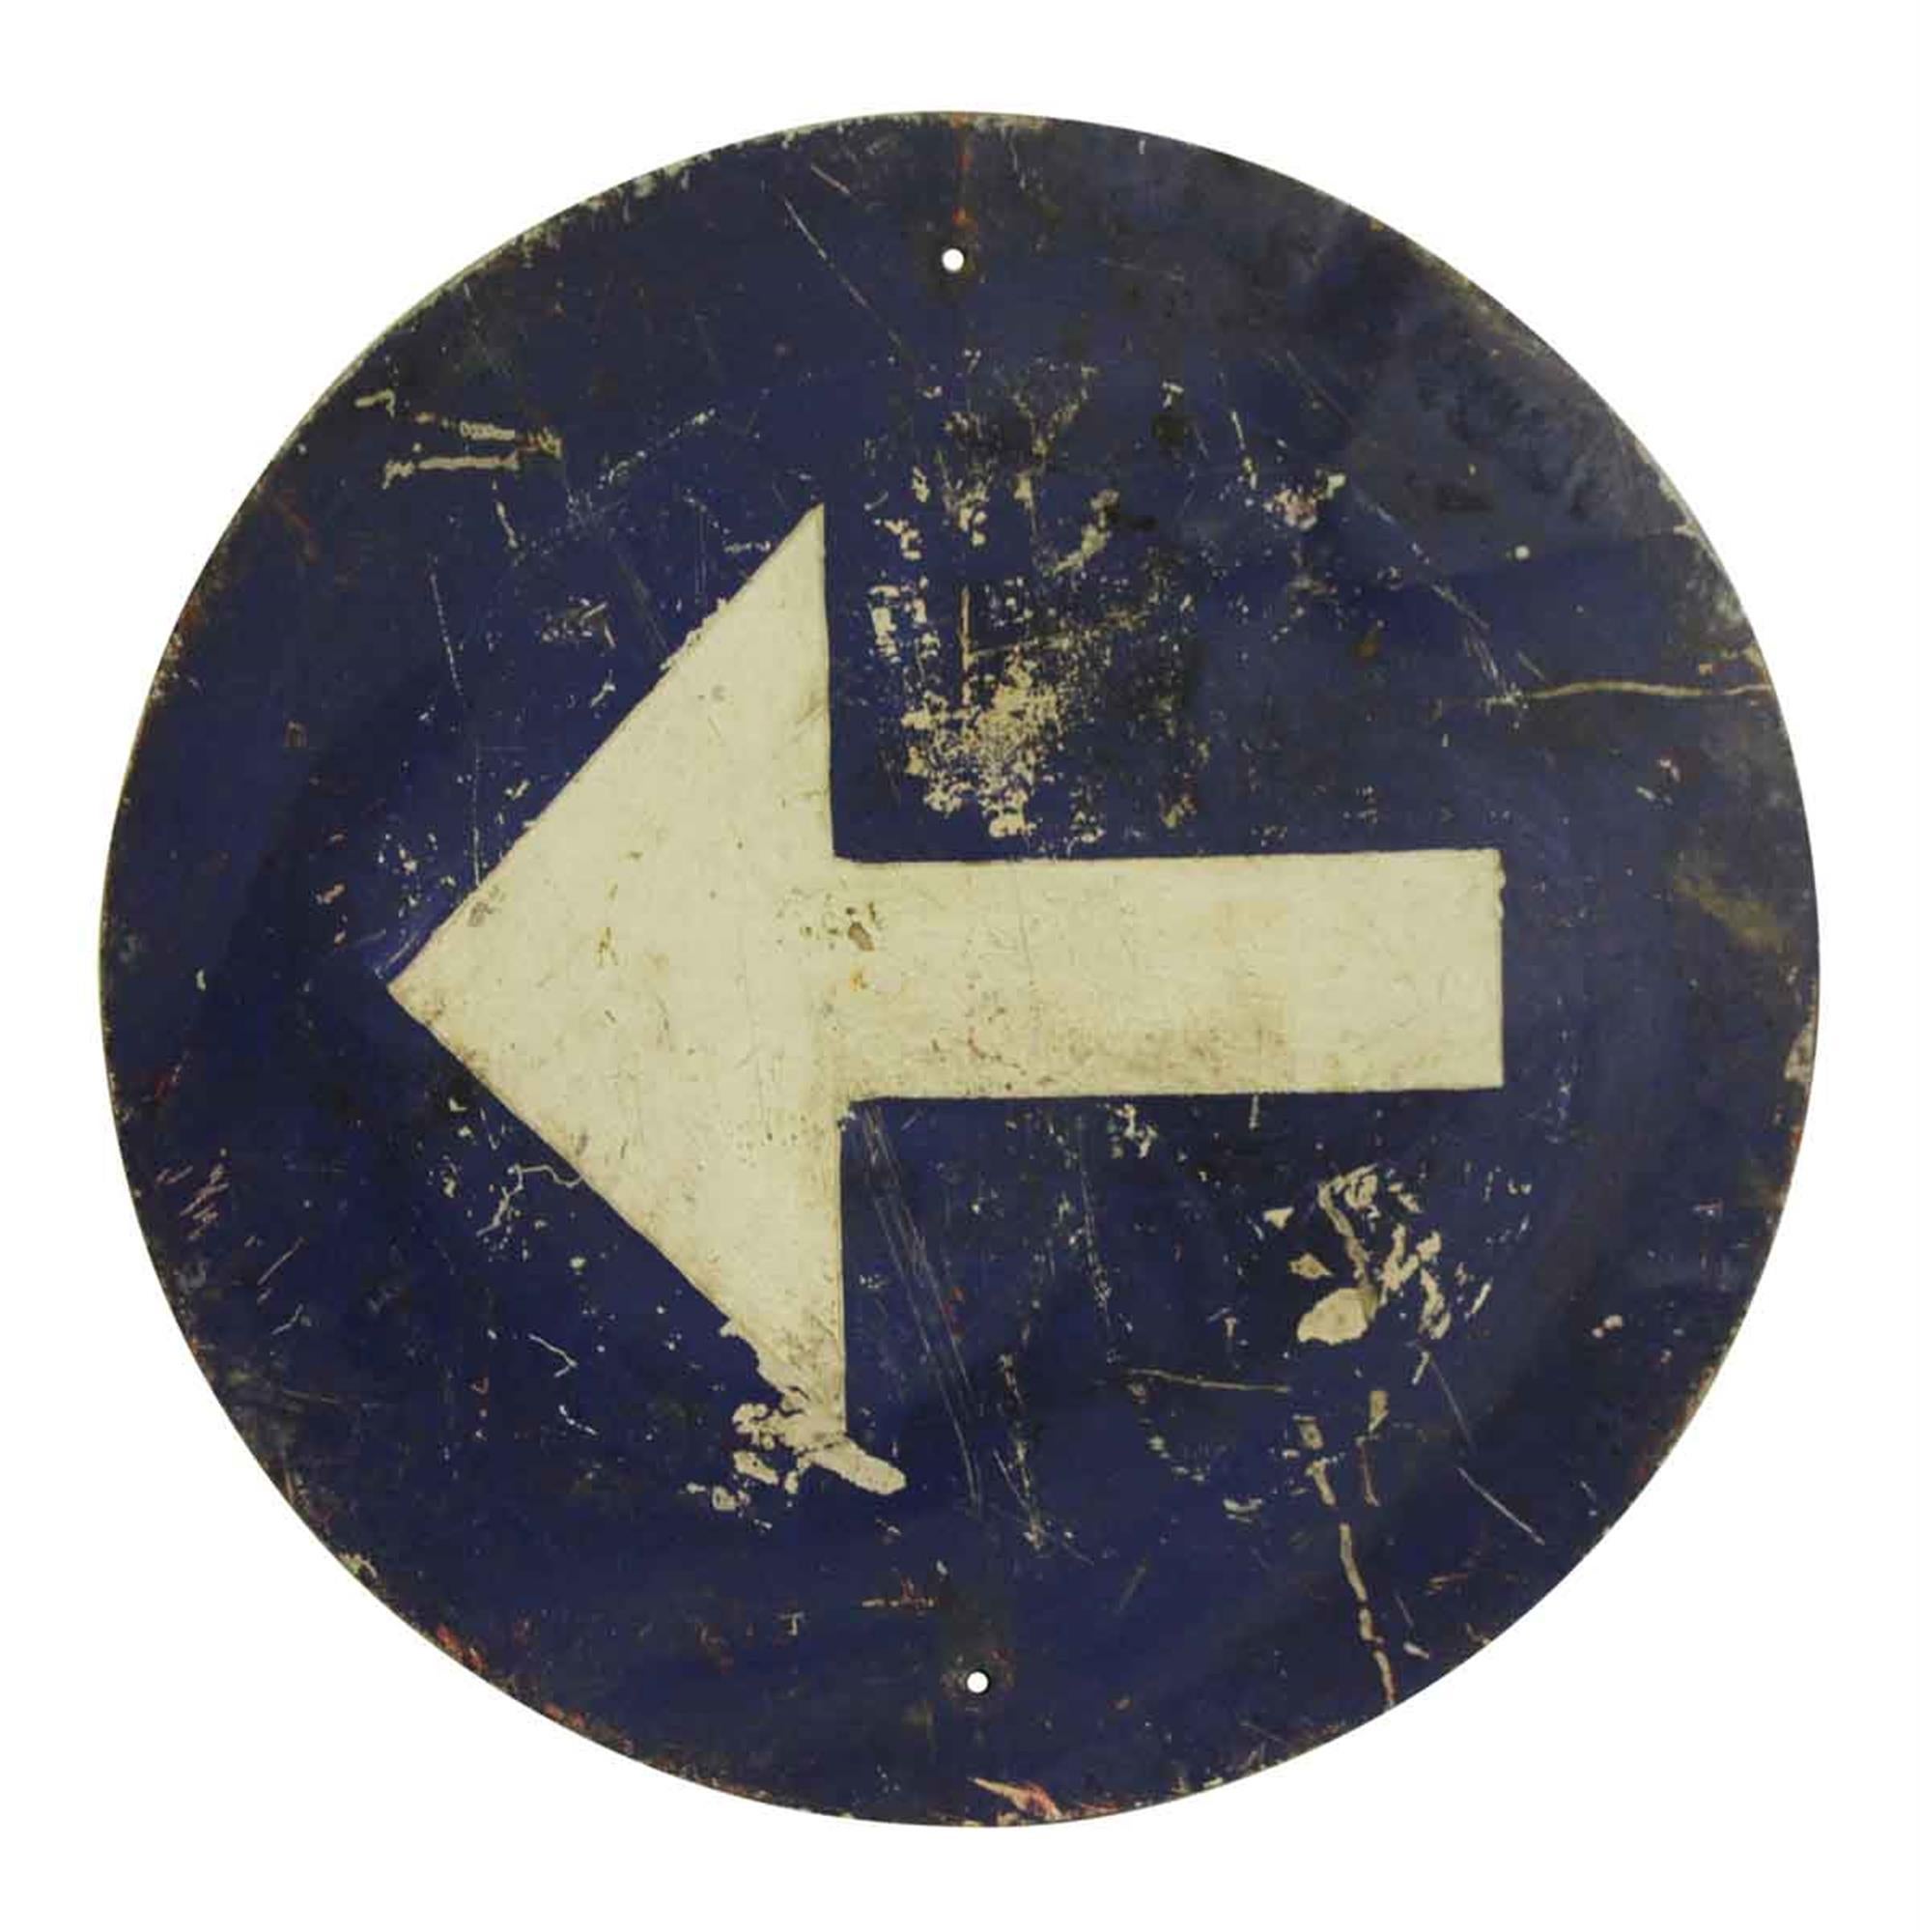 1970s Belgium Blue and White Arrow Direction Road or Street Sign